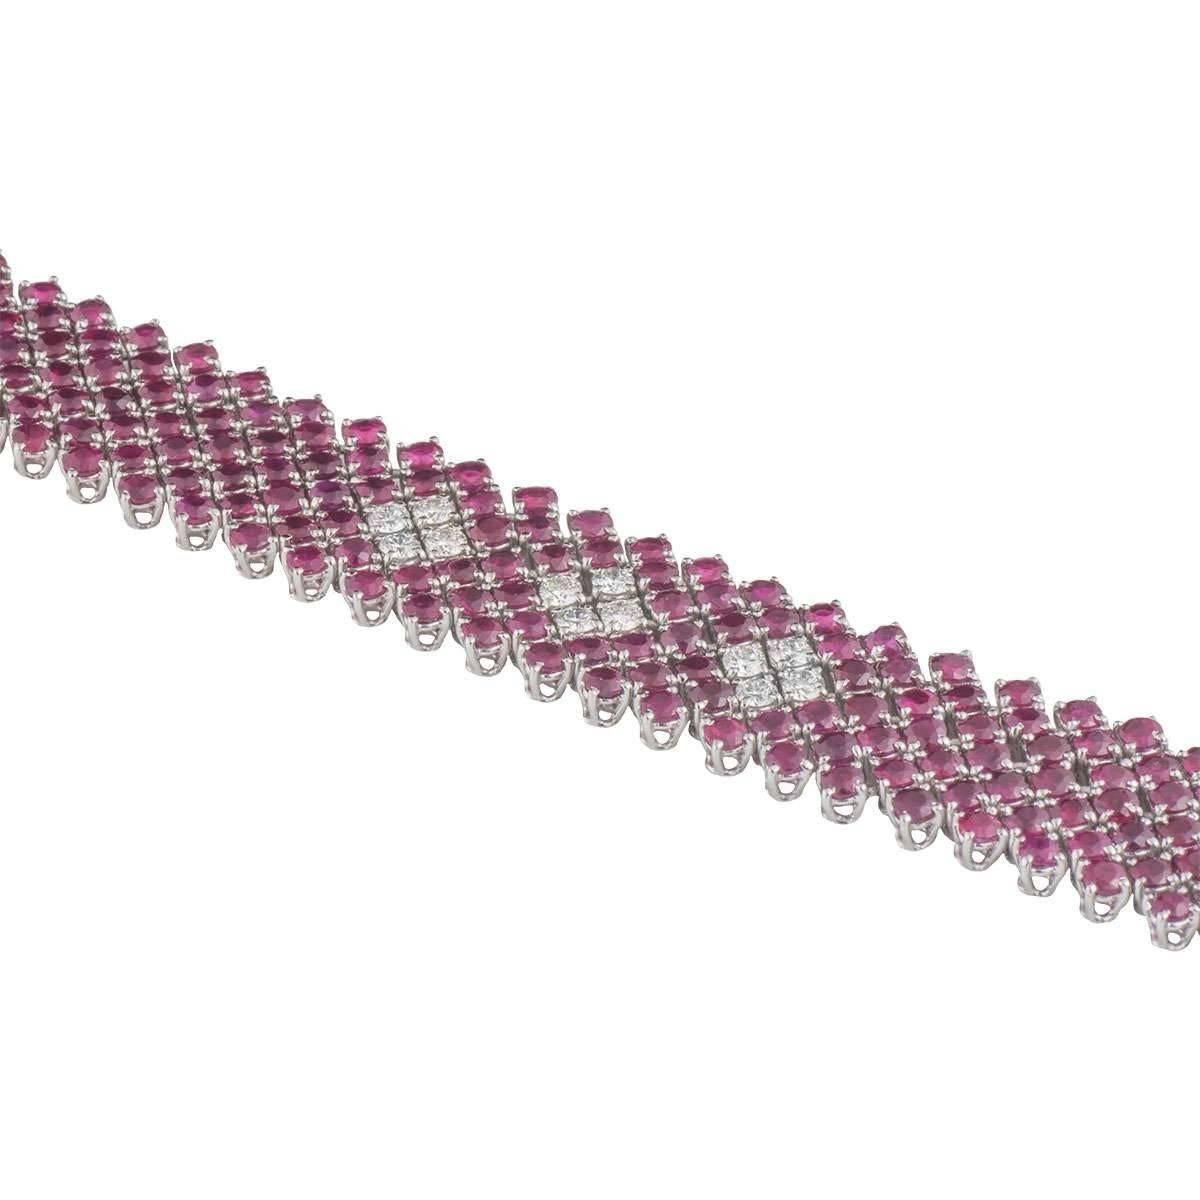 A vibrant 18k white gold diamond and ruby bracelet. The bracelet comprises of 241 round cut rubies in 4 claw setting dispersed between diagonal 7 rows. The rubies have a total weight of approximately 16.87ct, with a pinkish-red hue throughout.